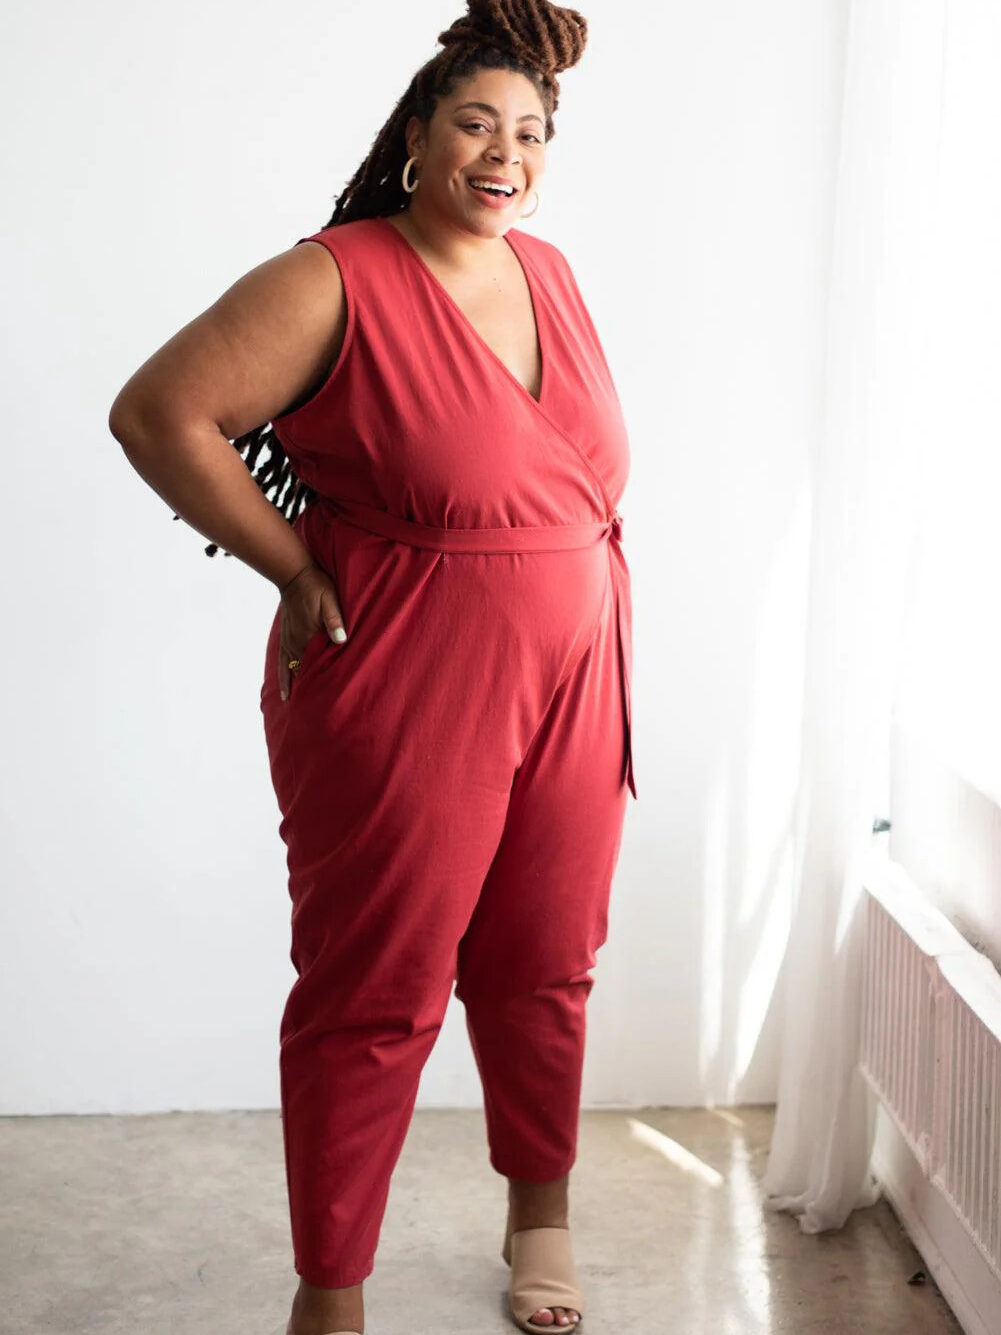 A smiling woman in a red jumpsuit posing confidently with one hand on her hip in a bright, white room.